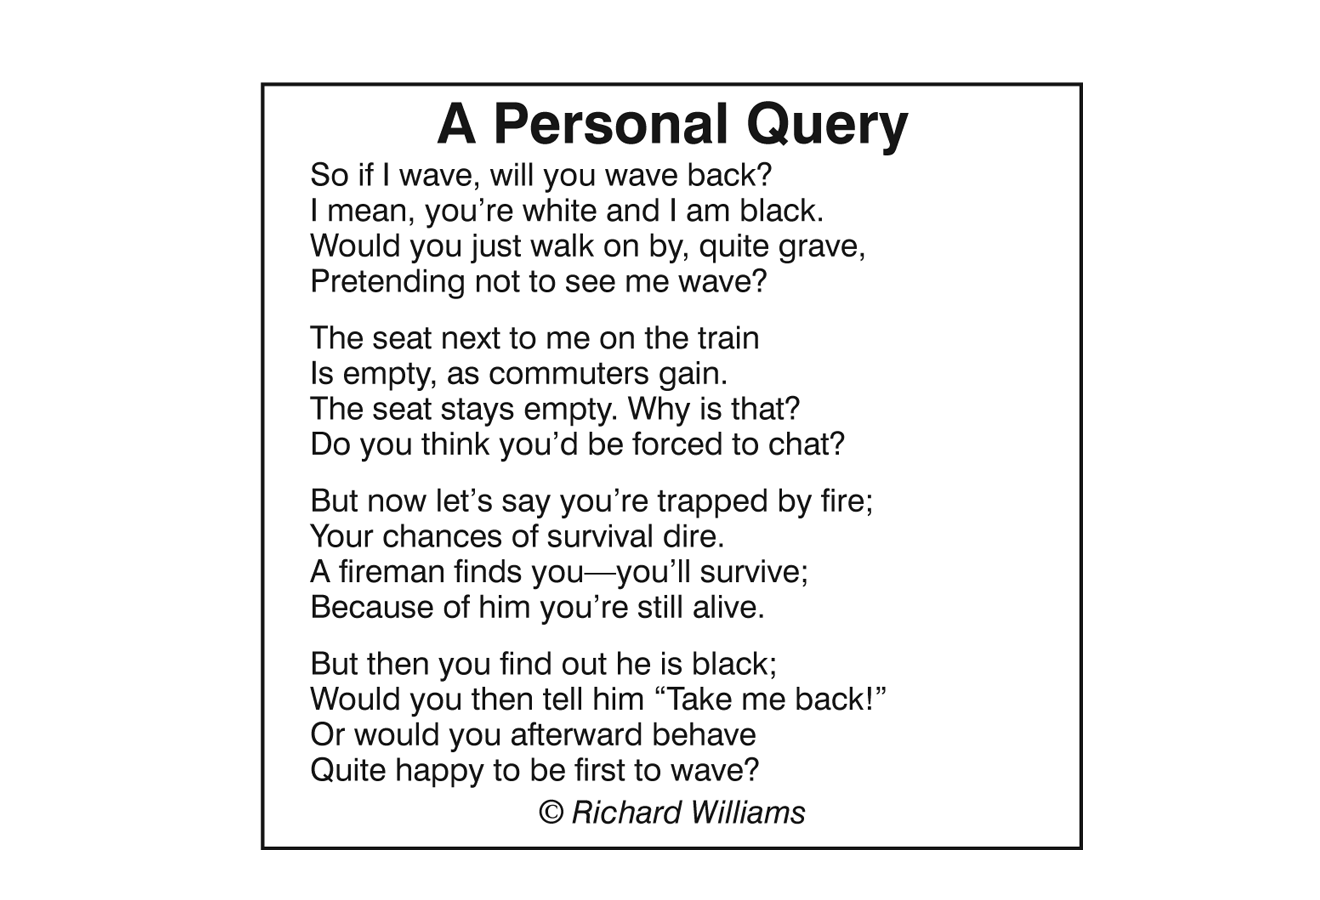 Richard Williams Poem - A Personal Query